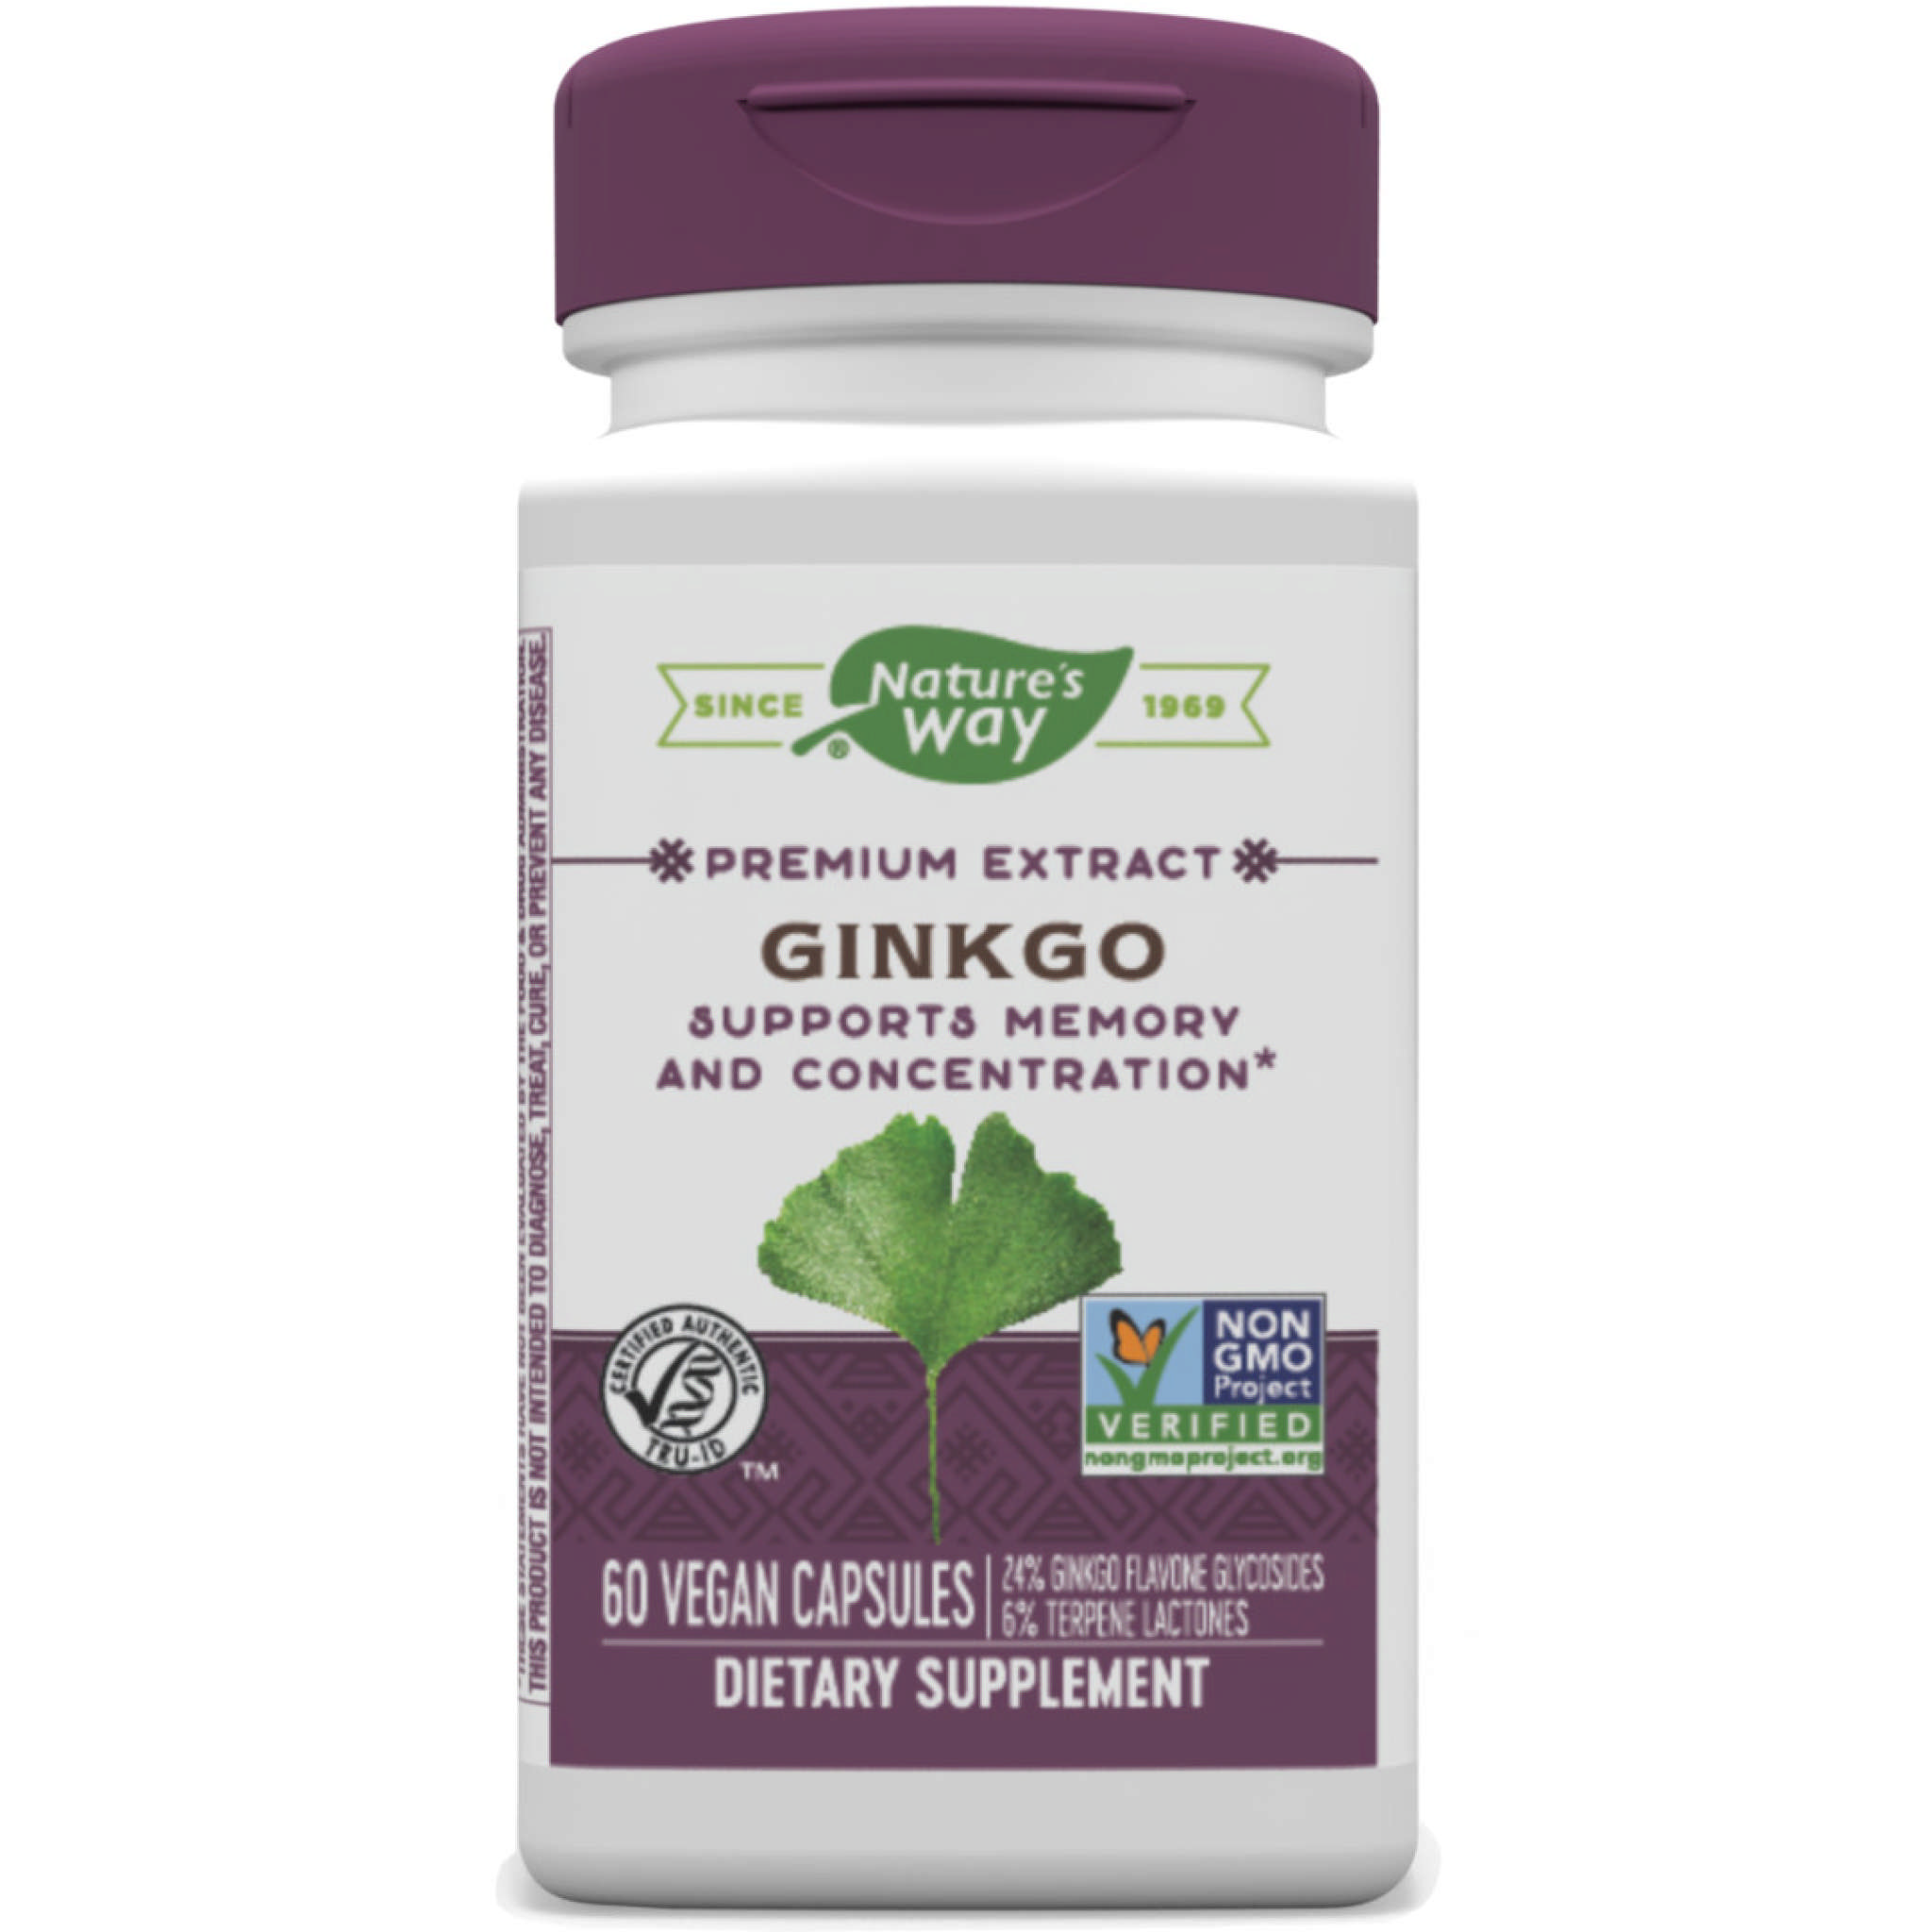 Natures Way - Ginkgo Extract 60 mg